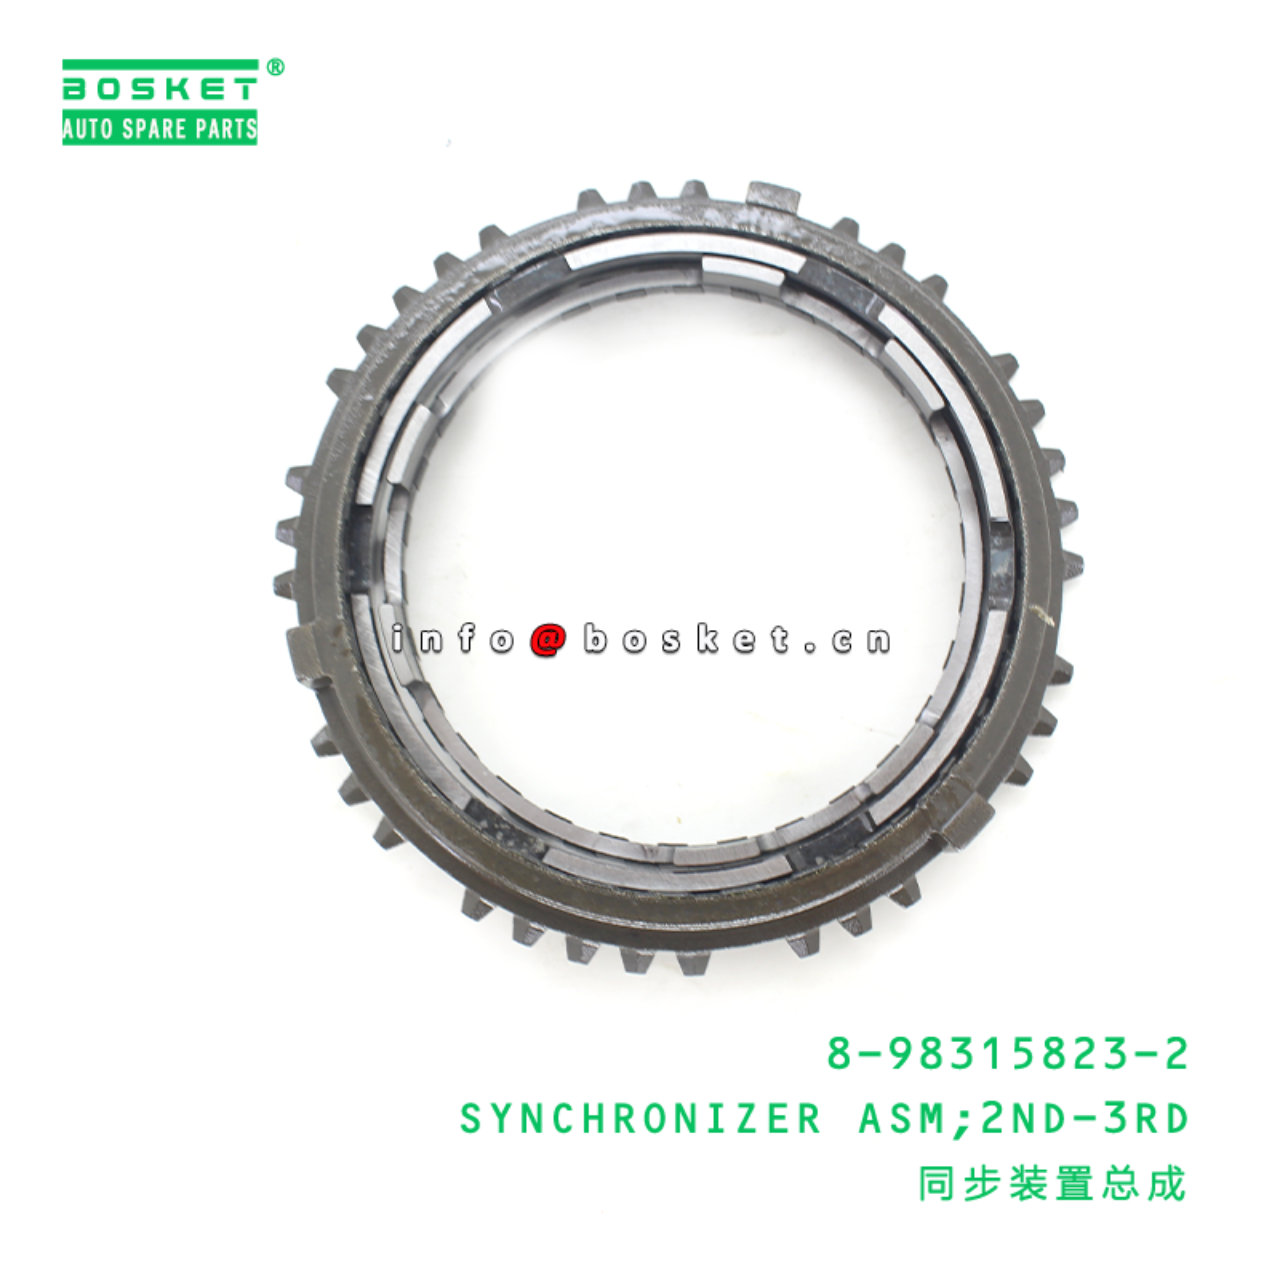 8-98315823-2 Second-Third Synchronizer Assembly 8983158232 Suitable for ISUZU FRR